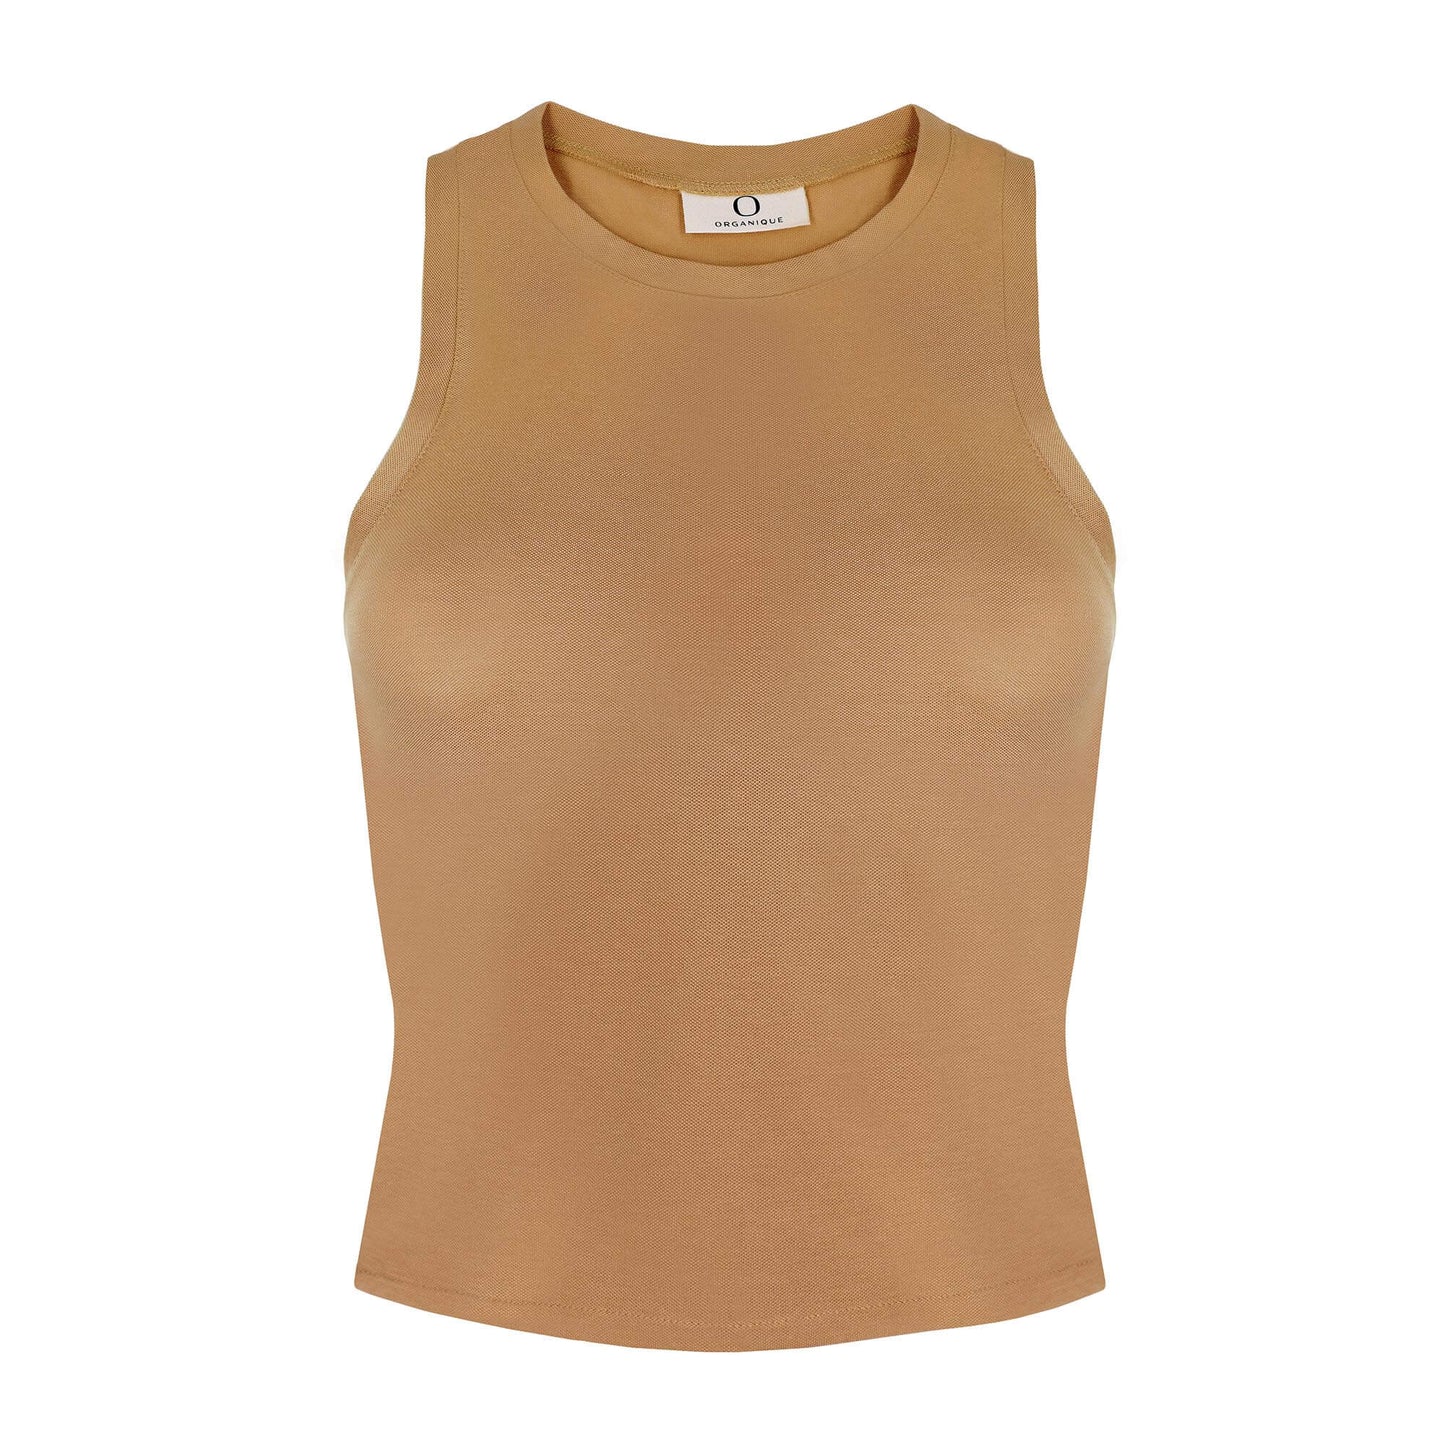 Image of vegan tank top in light brown made by Organique, a sustainable clothing brand.